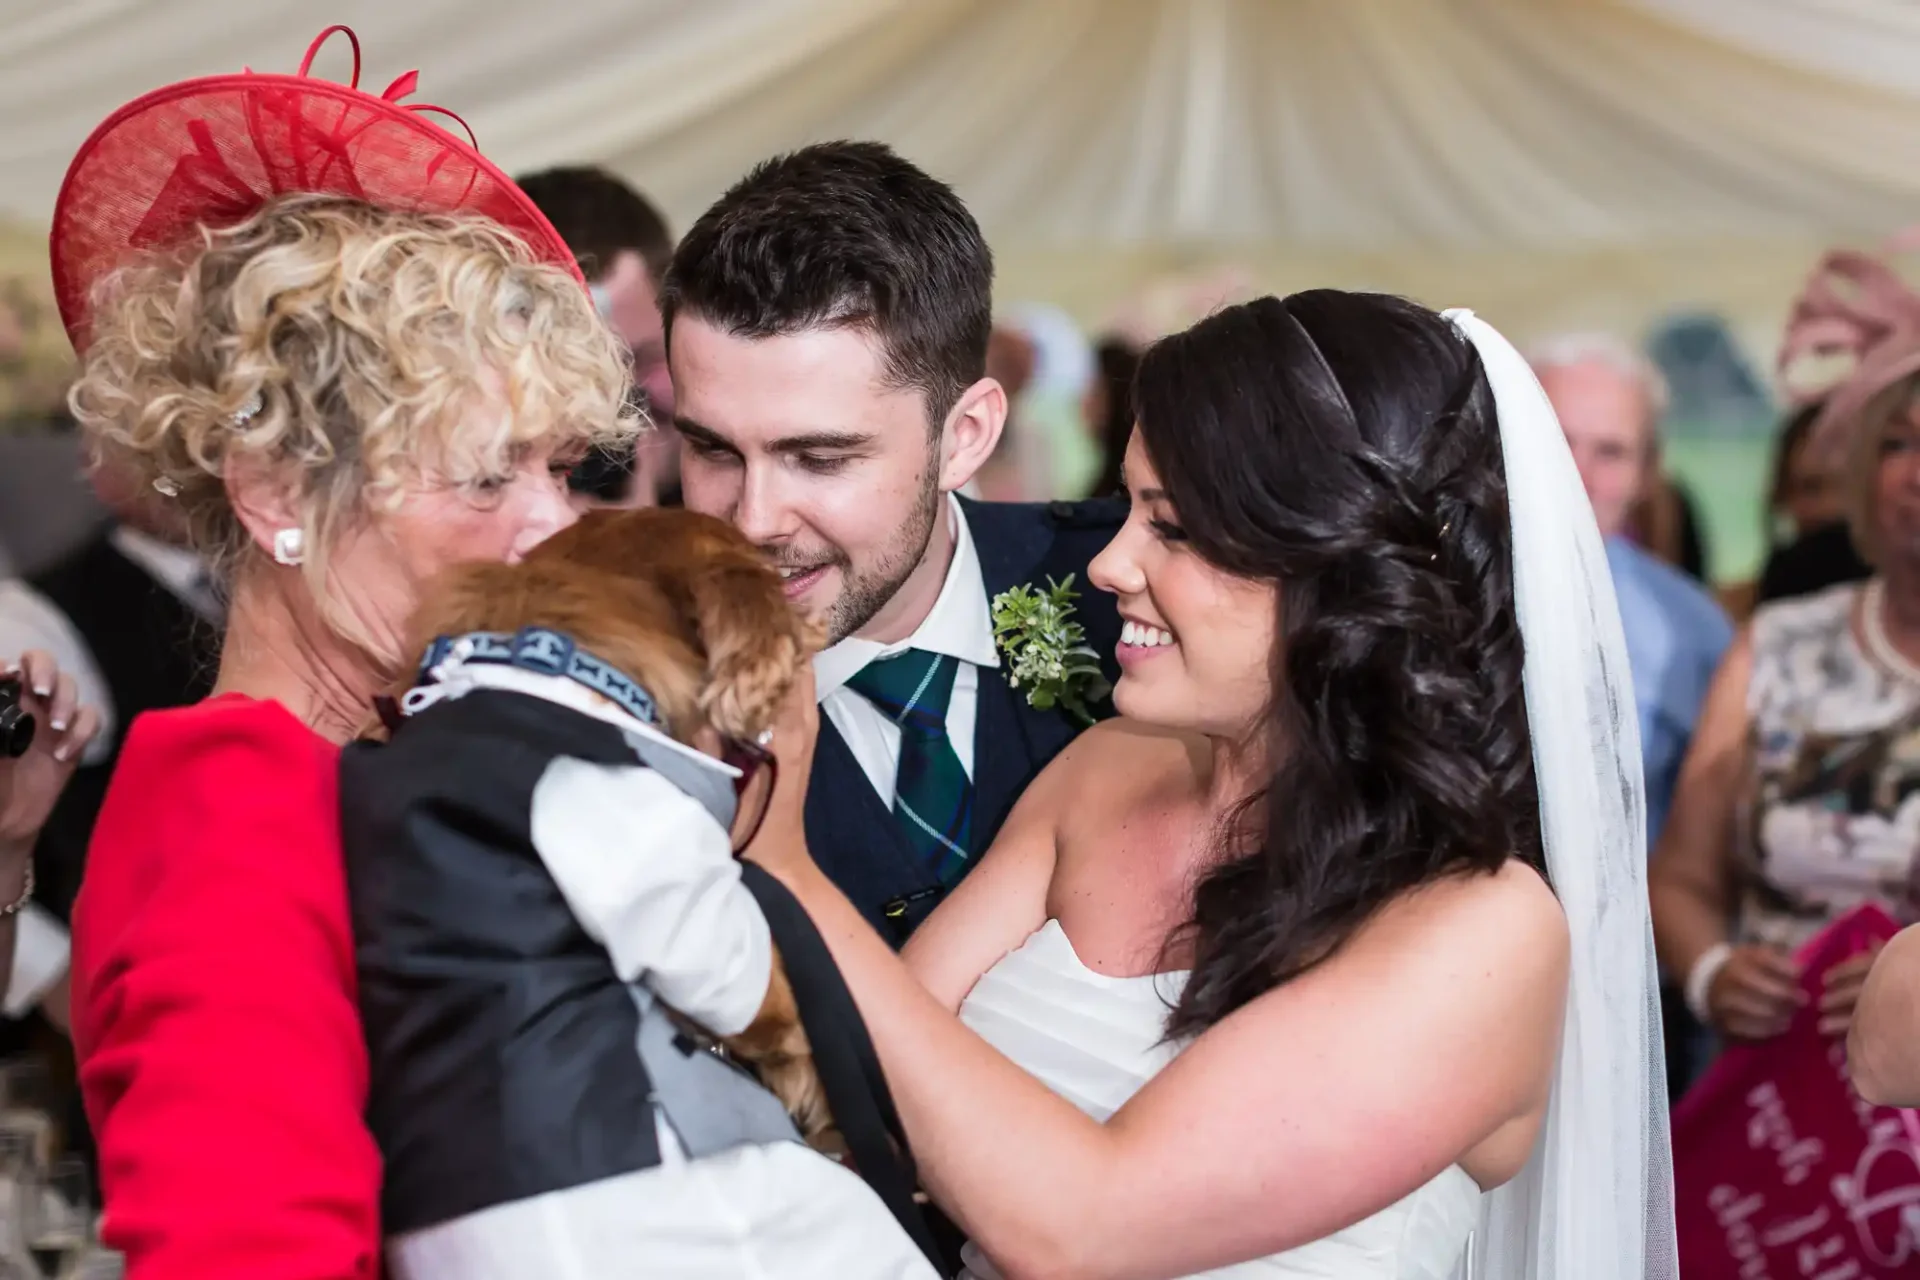 A bride and groom smiling at a small dog being held by a woman in a red hat at their wedding reception.